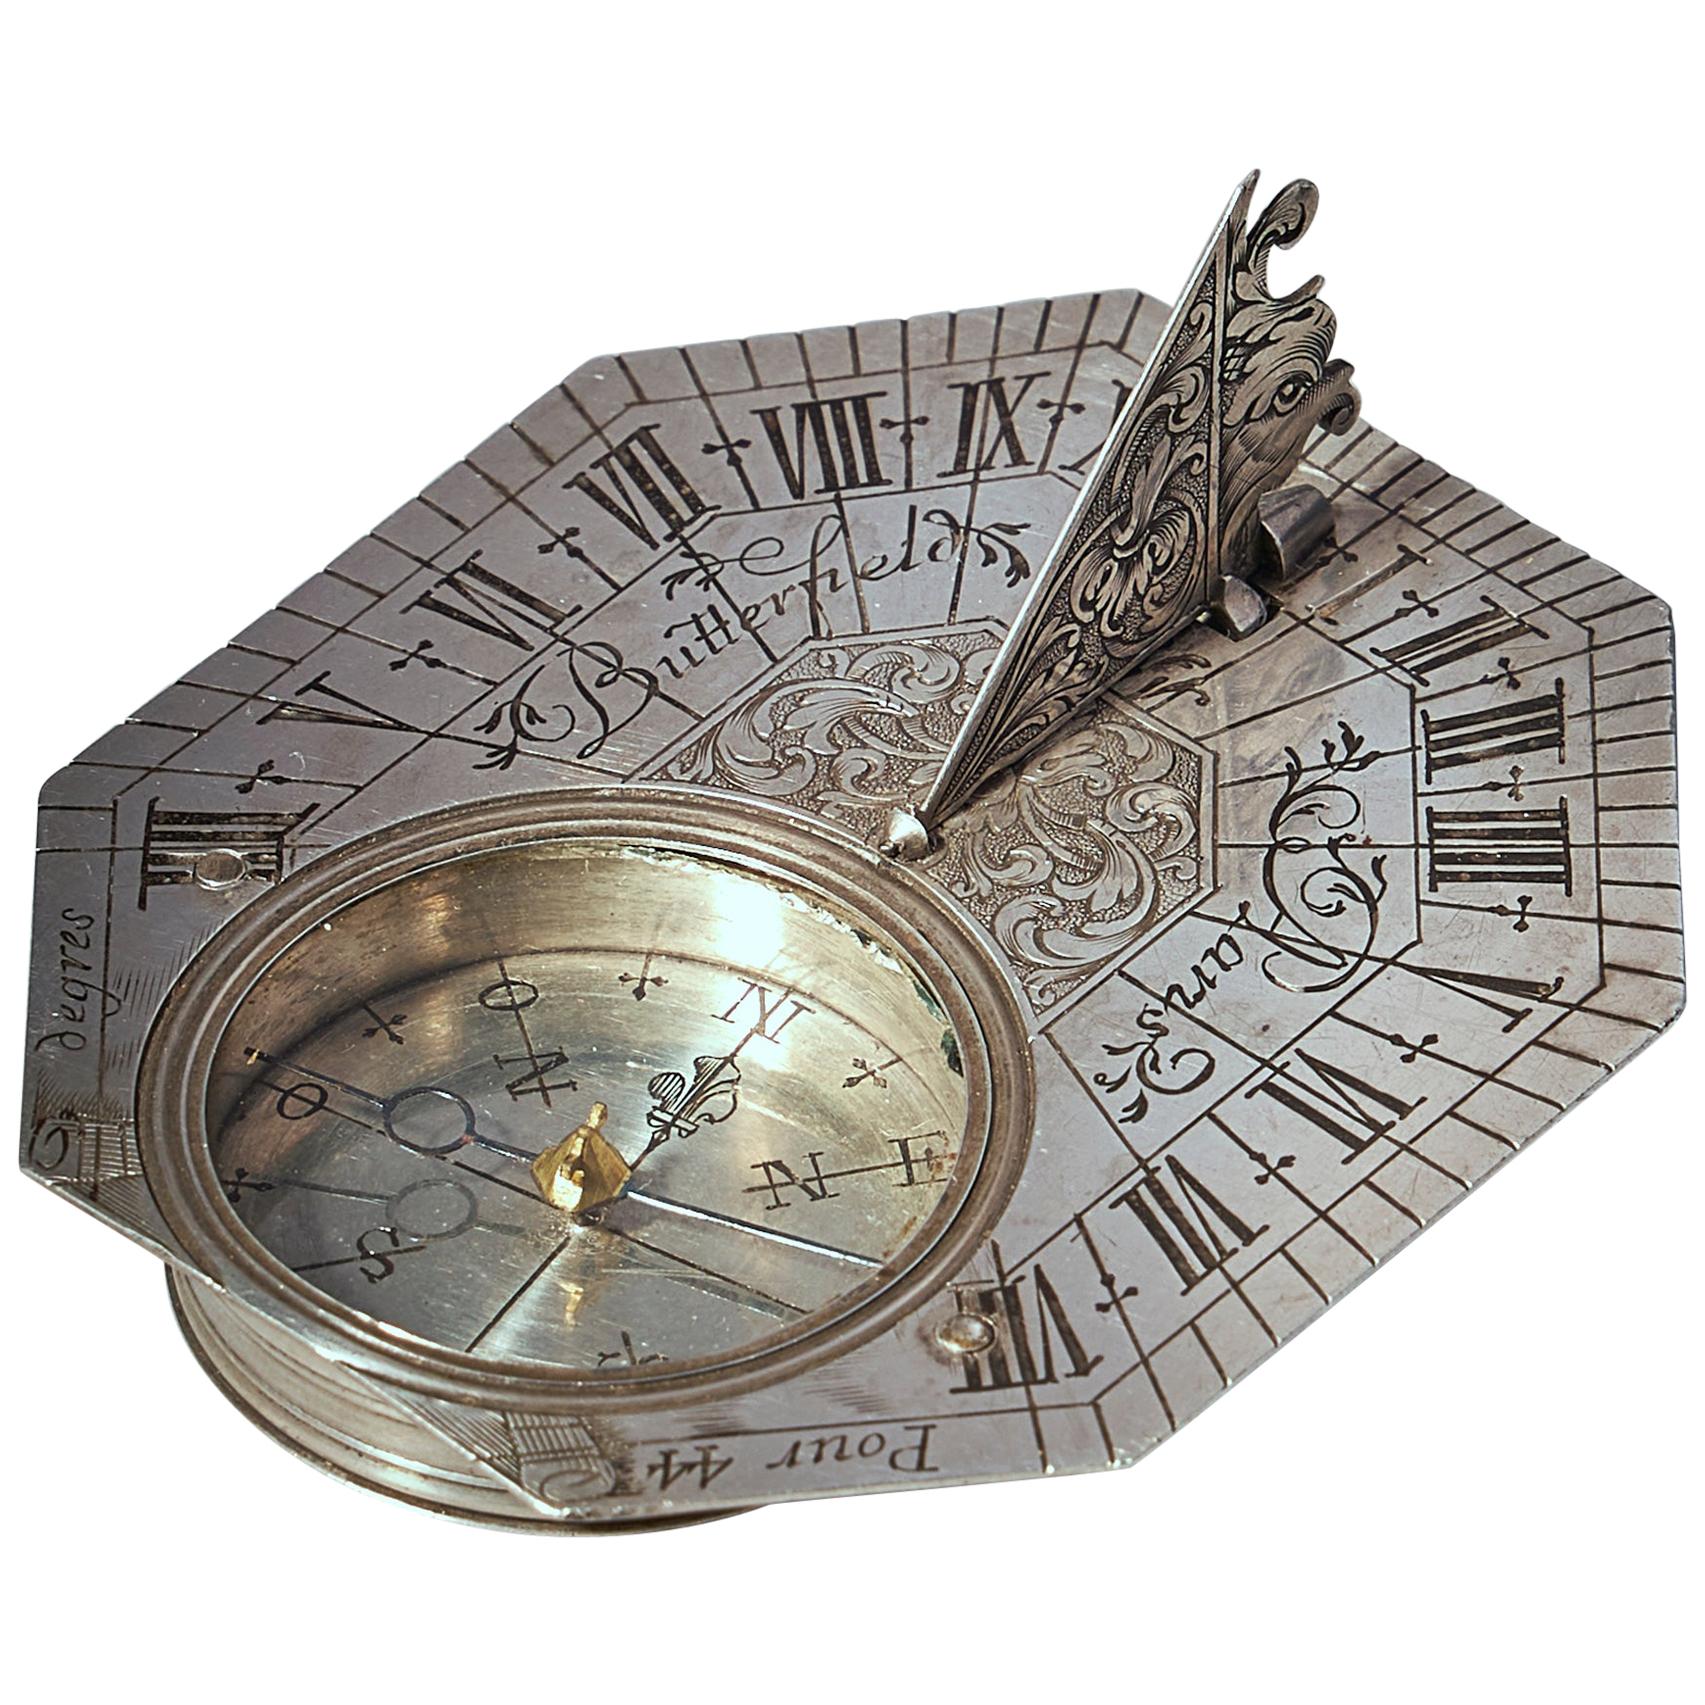 Details about   Silver PLATING SUNDIAL COMPASS VINTAGE POCKET PUSH BUTTON COMPASS 